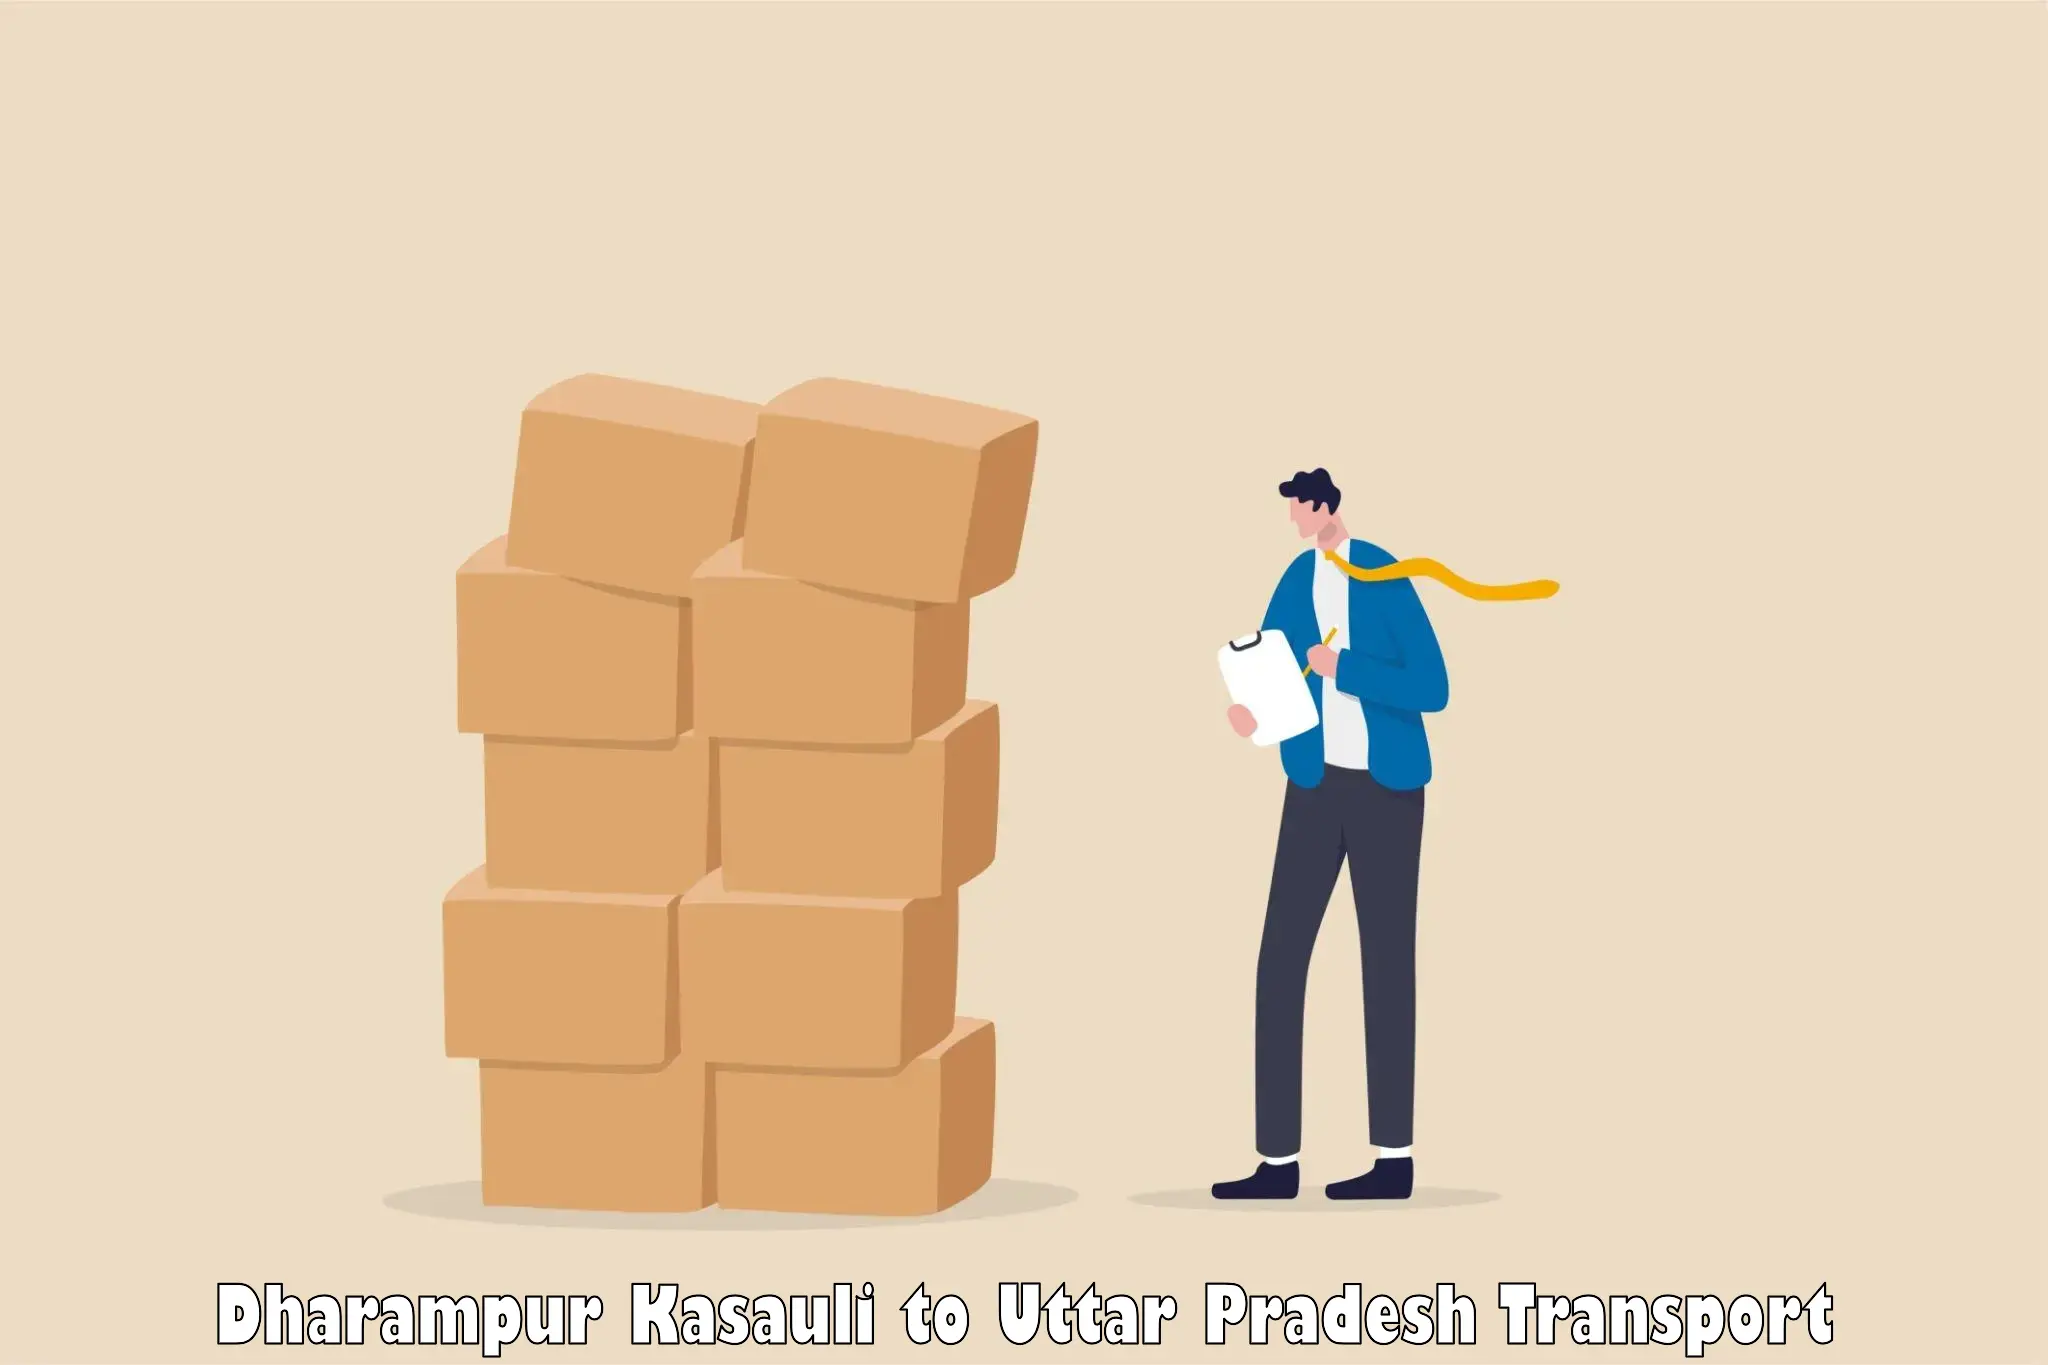 Daily parcel service transport Dharampur Kasauli to IIT Kanpur